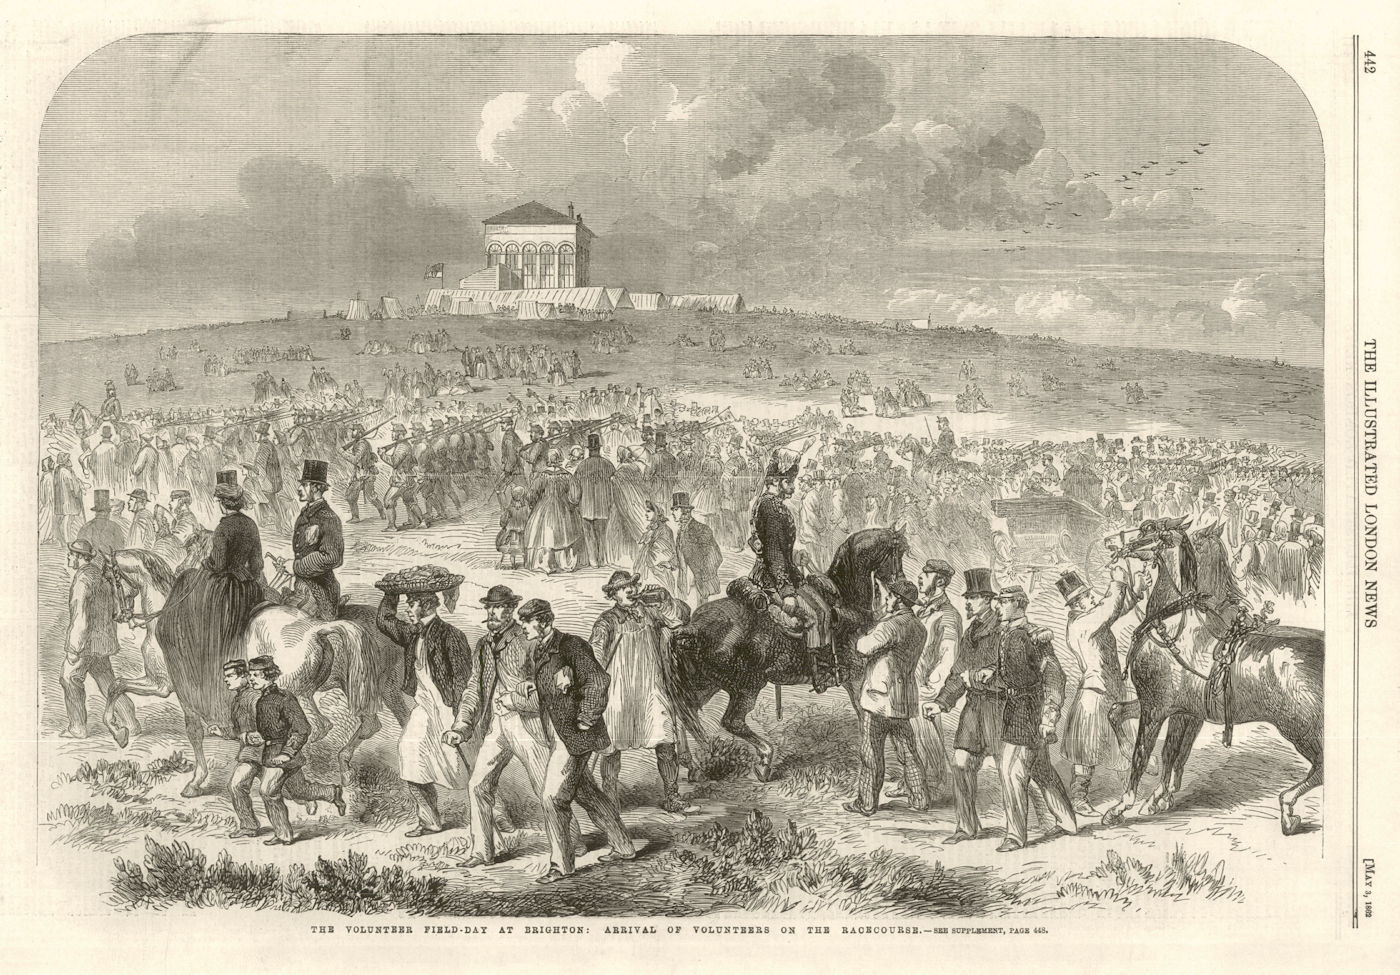 The Volunteer field day at Brighton: Arrival on the Racecourse. Sussex 1862